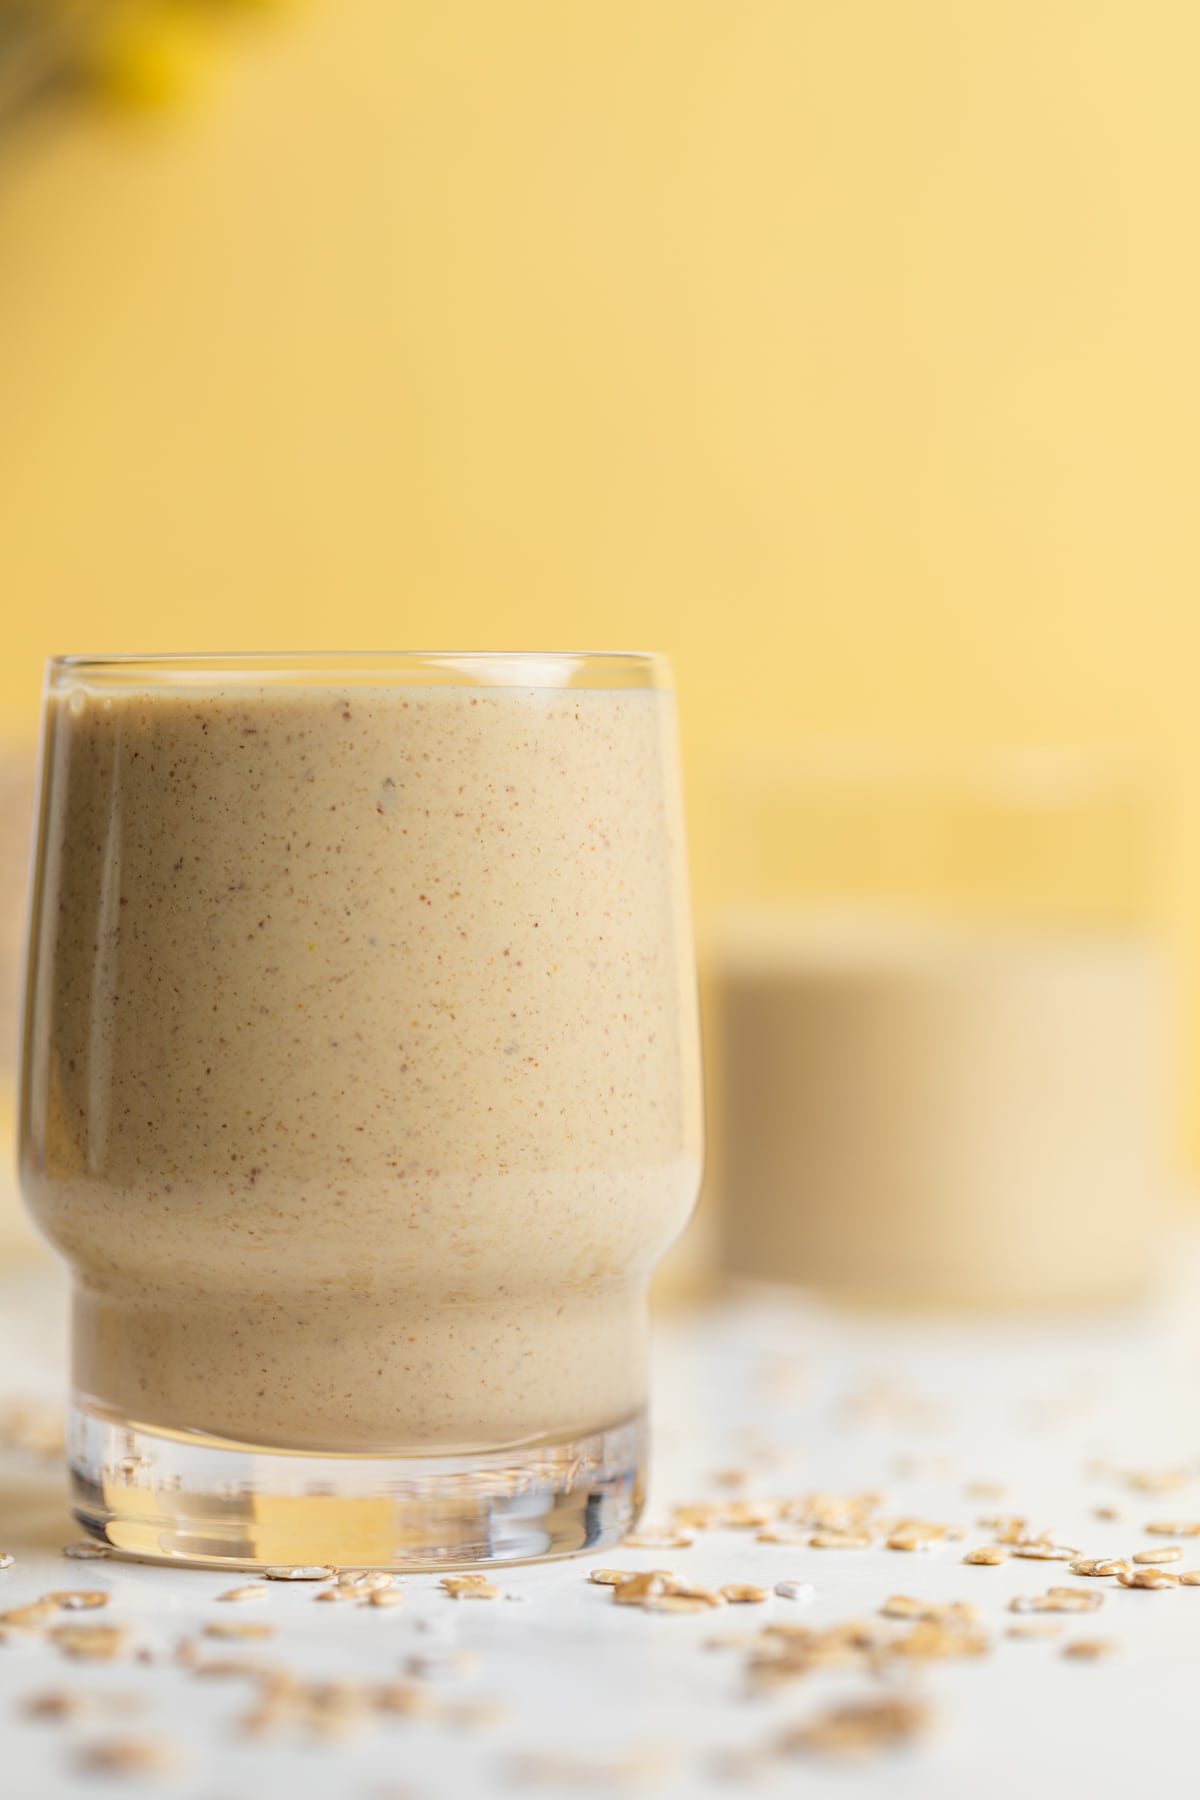 Peanut Butter Banana Oats Smoothie in a small glass.